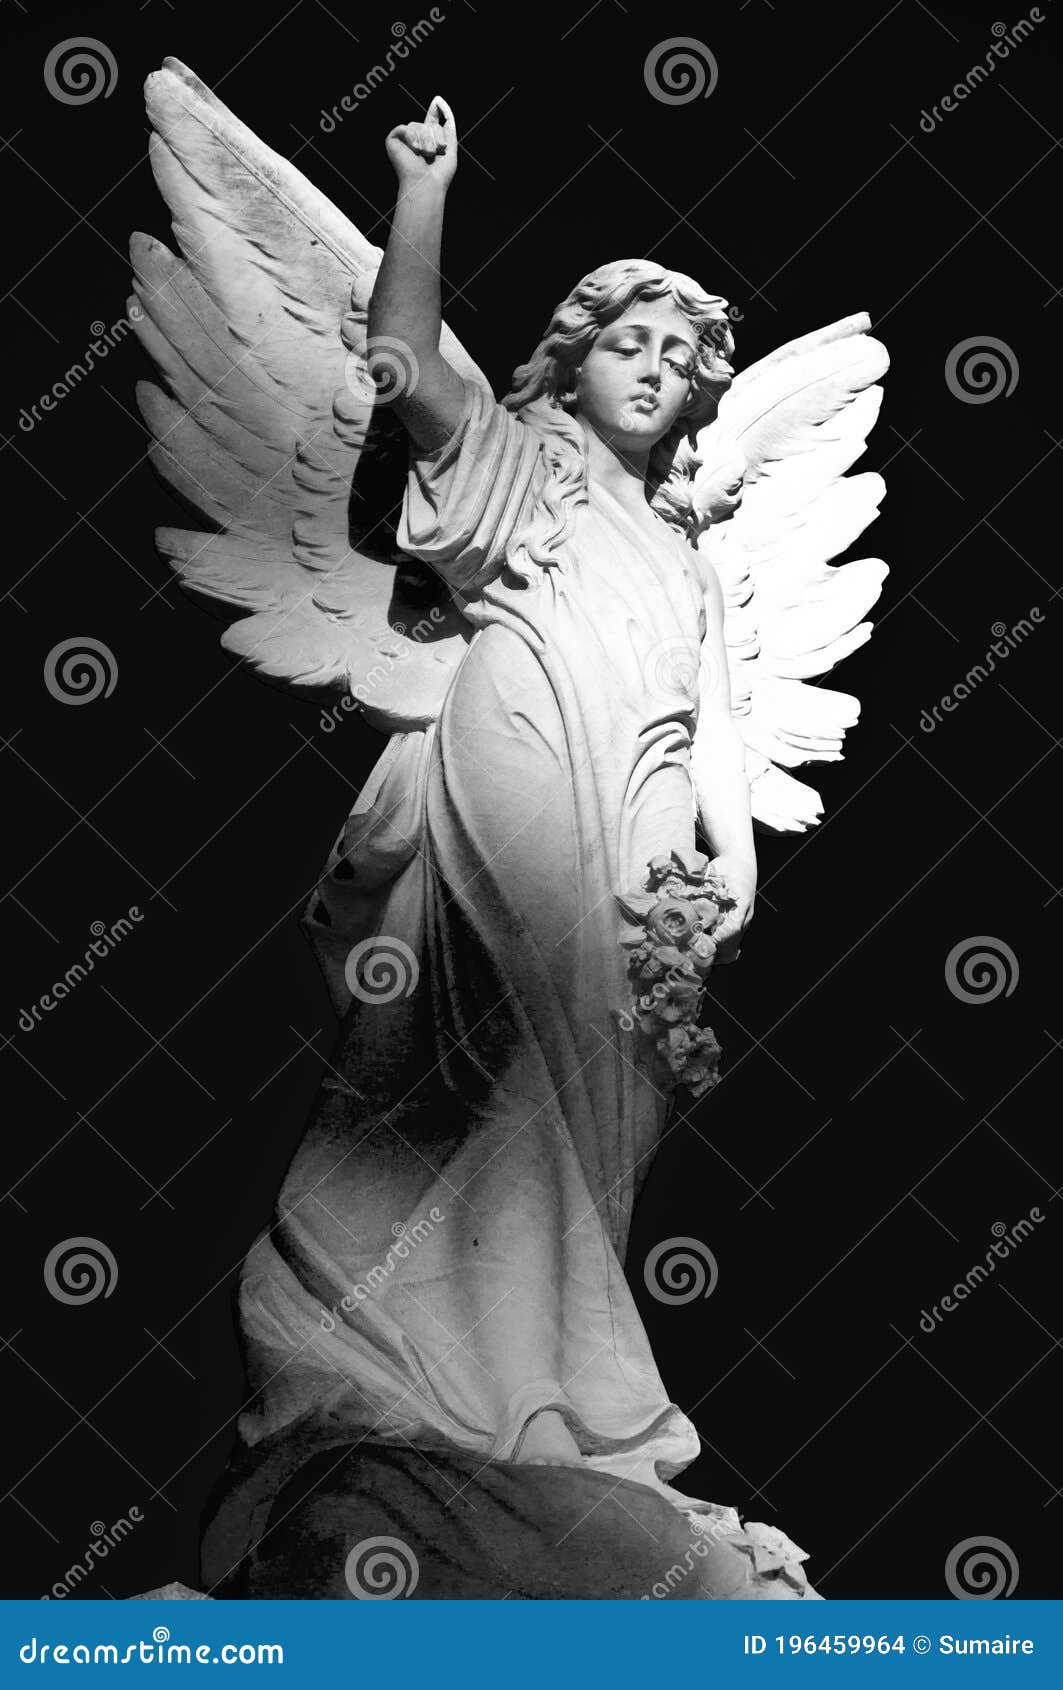 Winged Angel Grave Statue Raised Right Hand Holding Flowers in Left Hand  Black and White Stock Photo - Image of shadows, black: 196459964